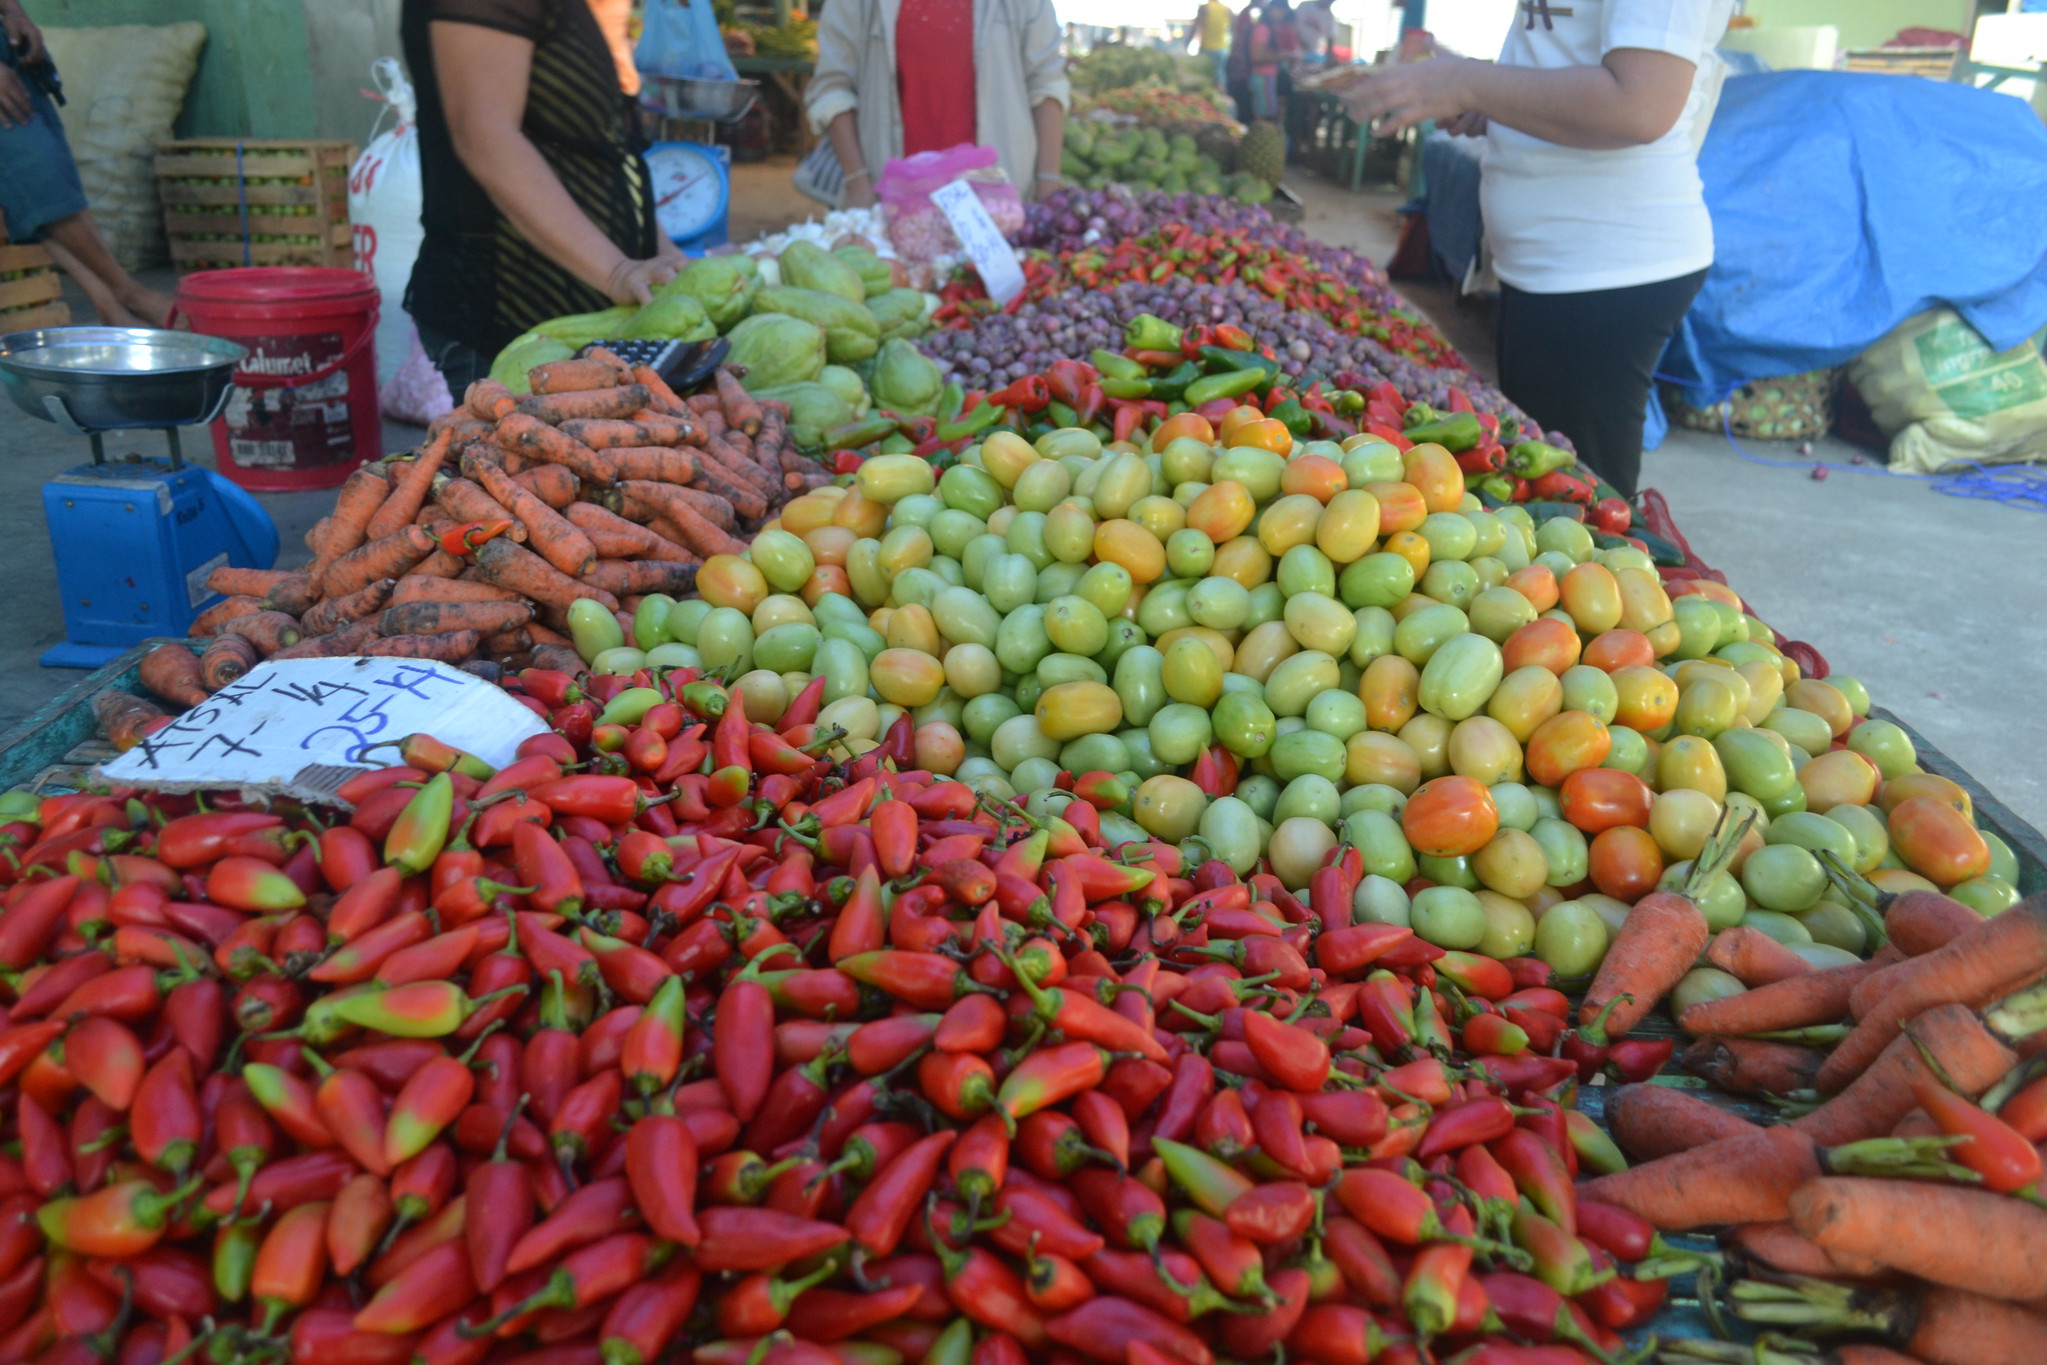 Piles of vegetables at vegetable market, Dipolog City, Philippines.